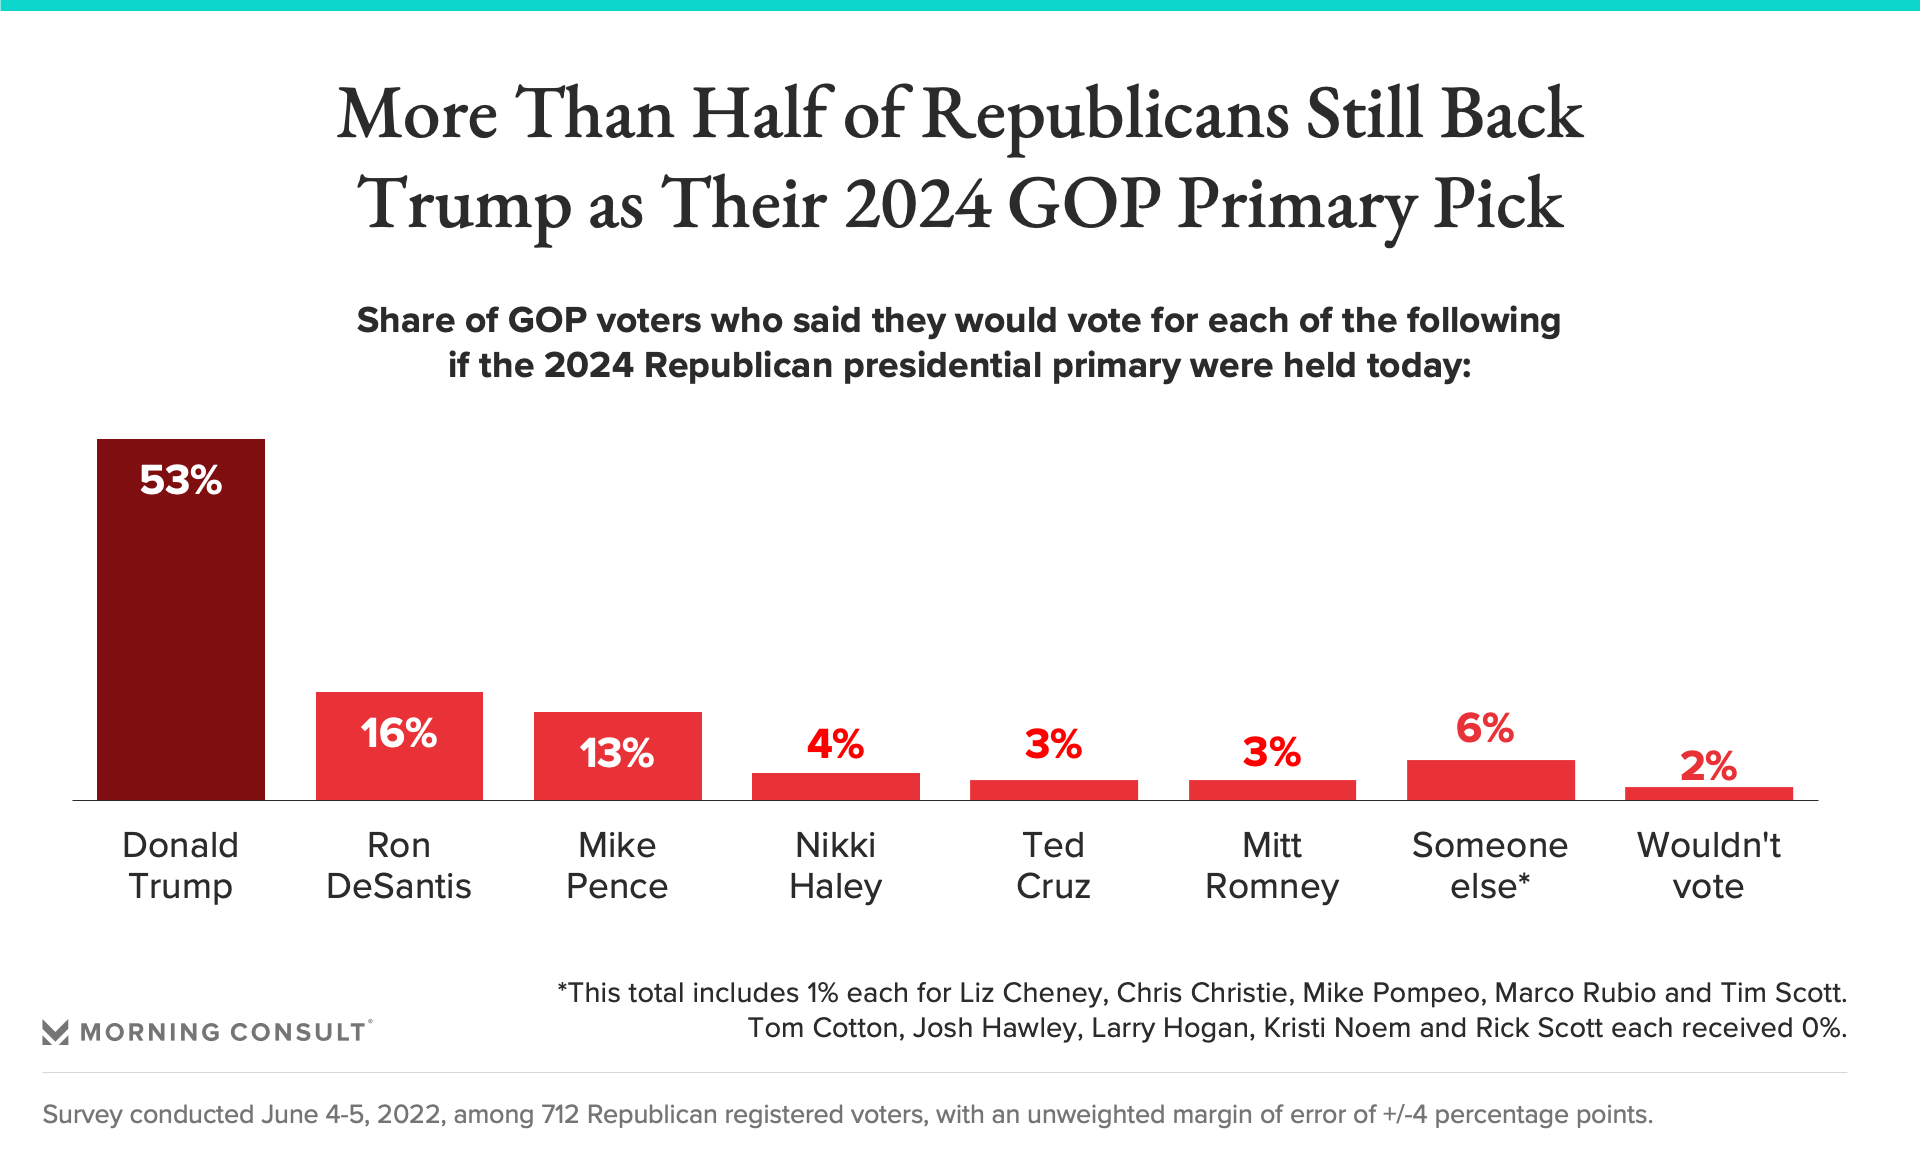 Trump Is Still Dominating the 2024 GOP Primary Field